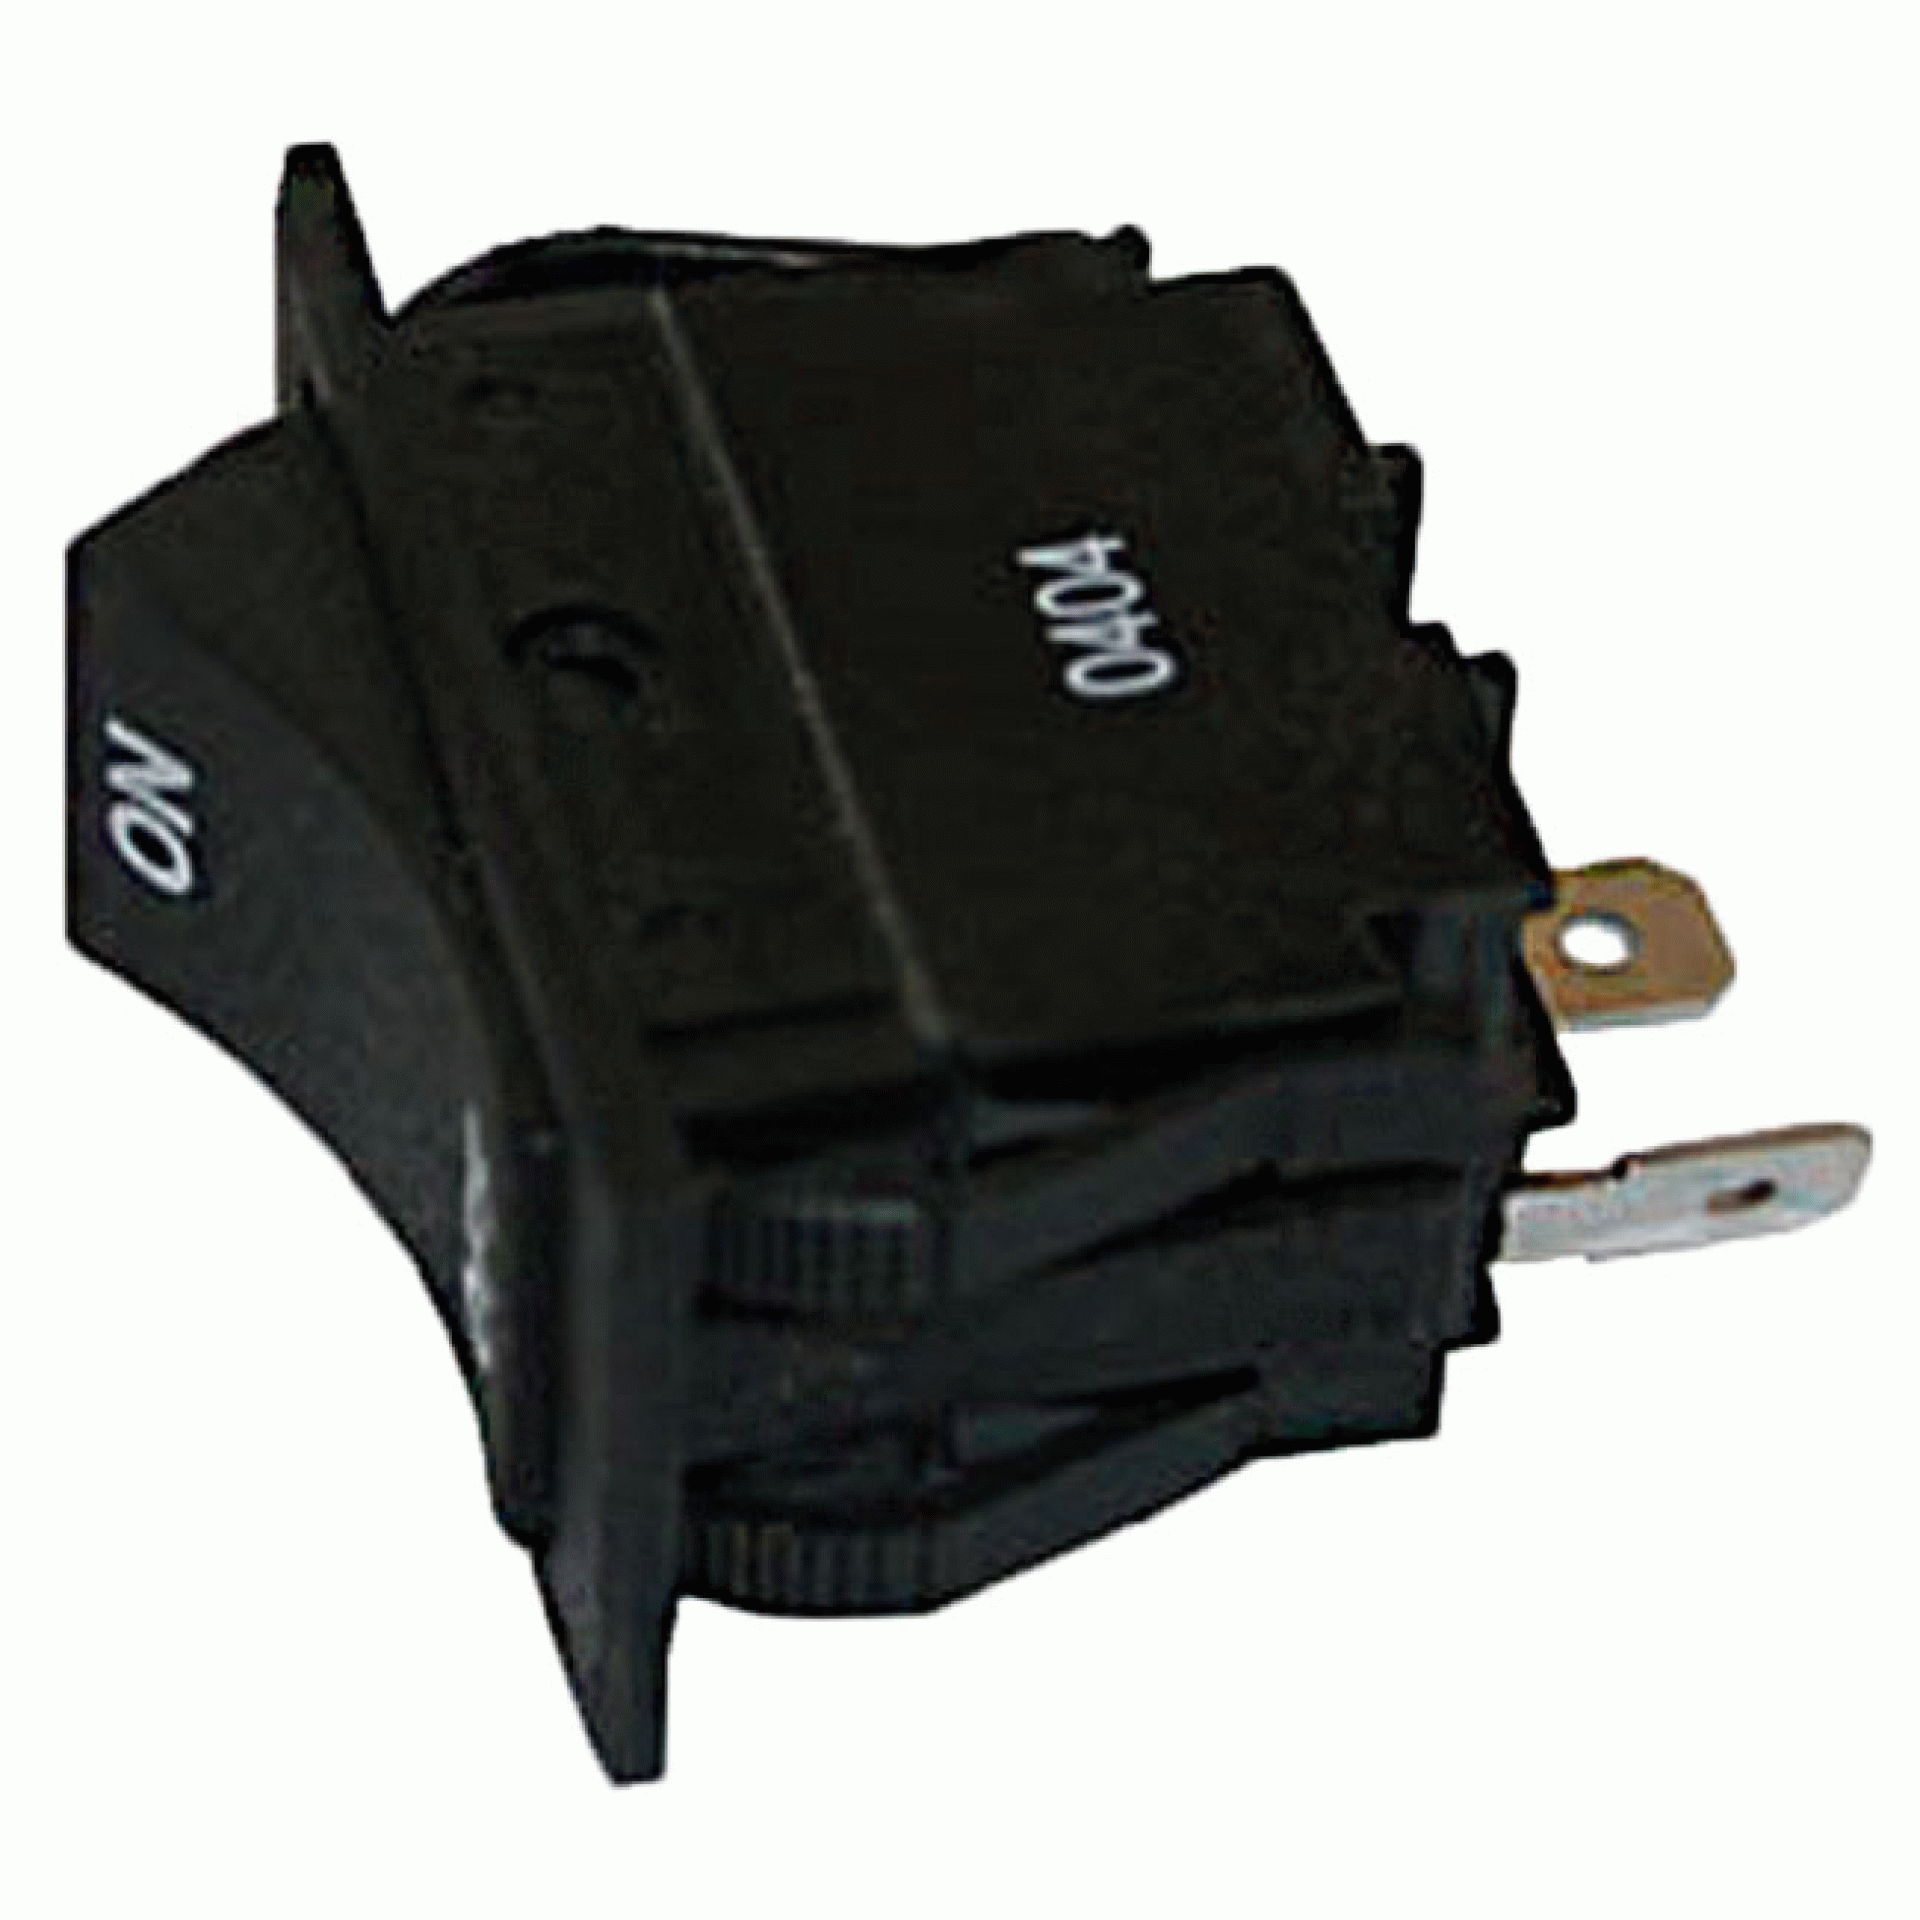 ATWOOD MOBILE PRODUCTS LLC | 87586 | LIGHT SWITCH FOR DELUXE POWER JACK